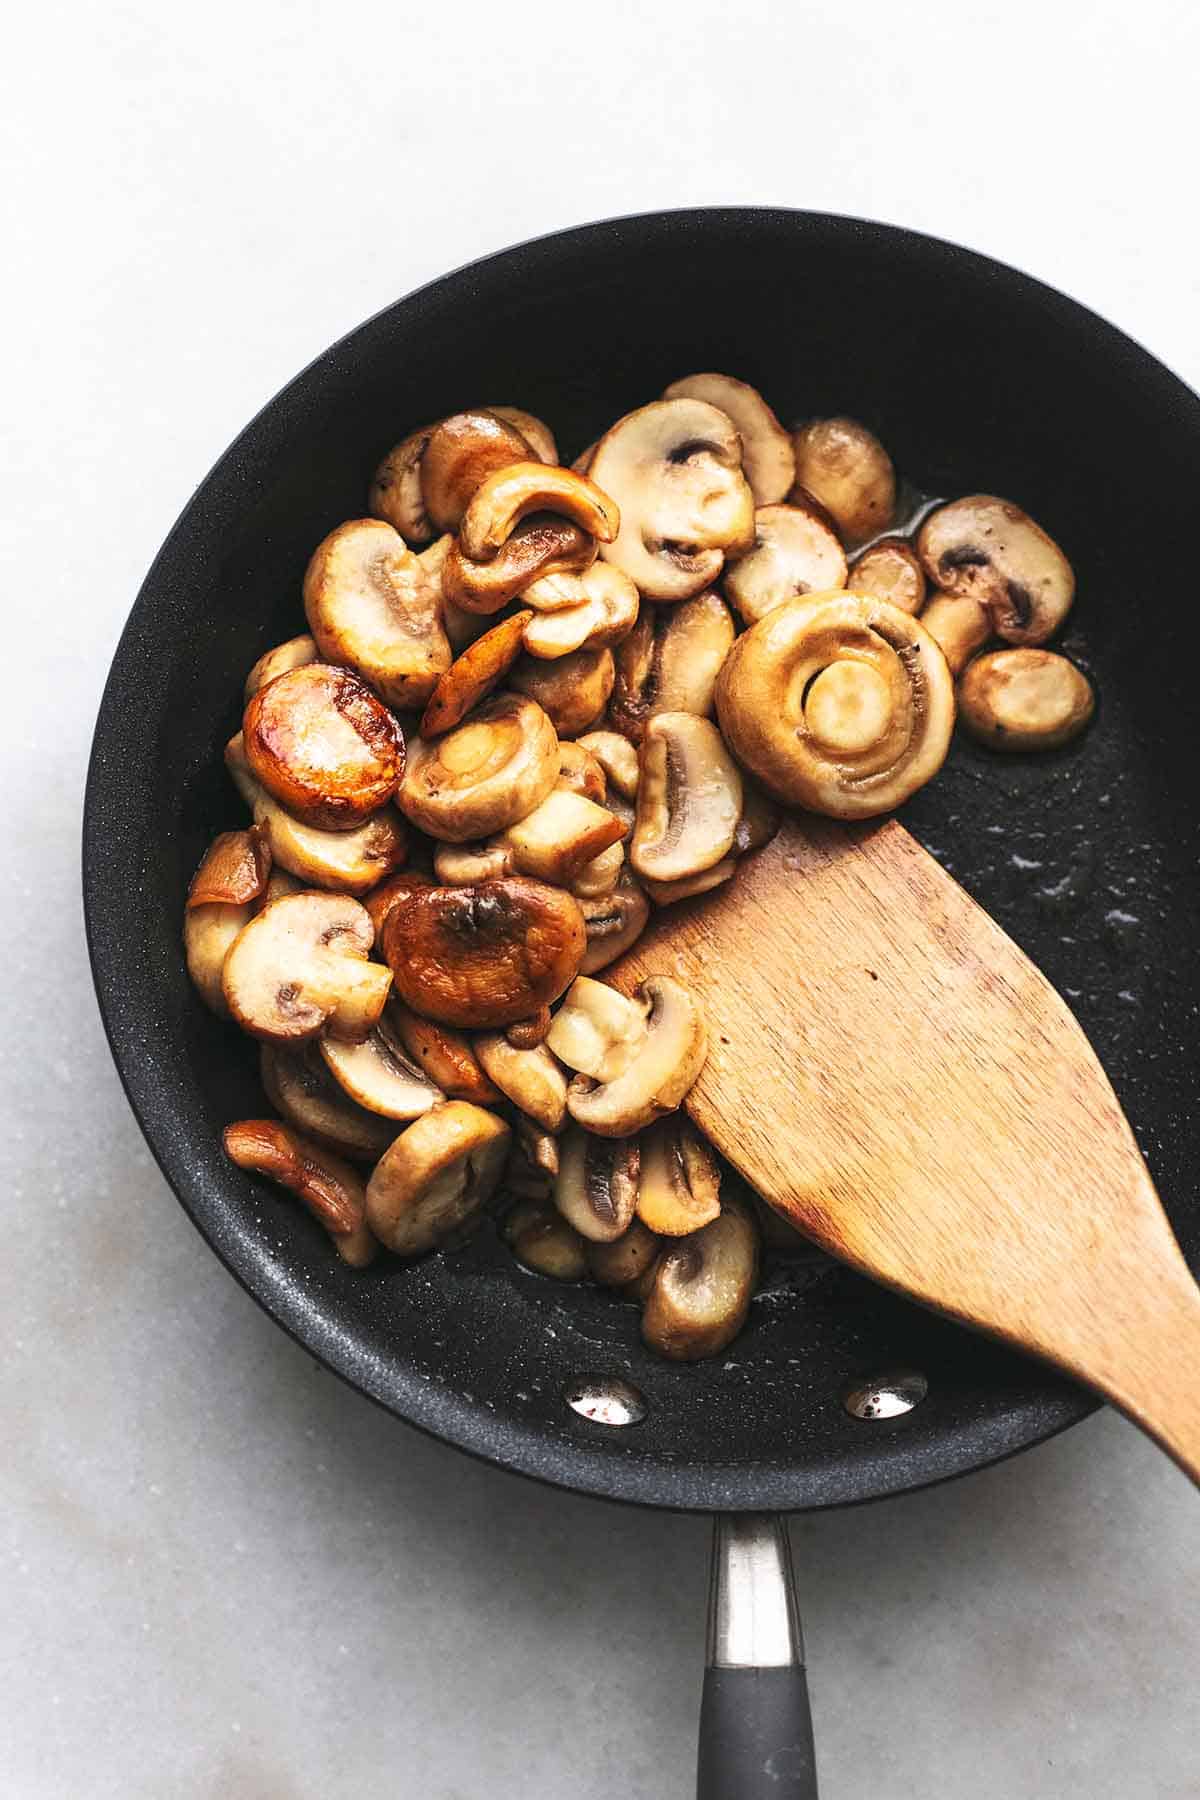 top view of sautéed mushrooms in a black pan with a wooden spoon.